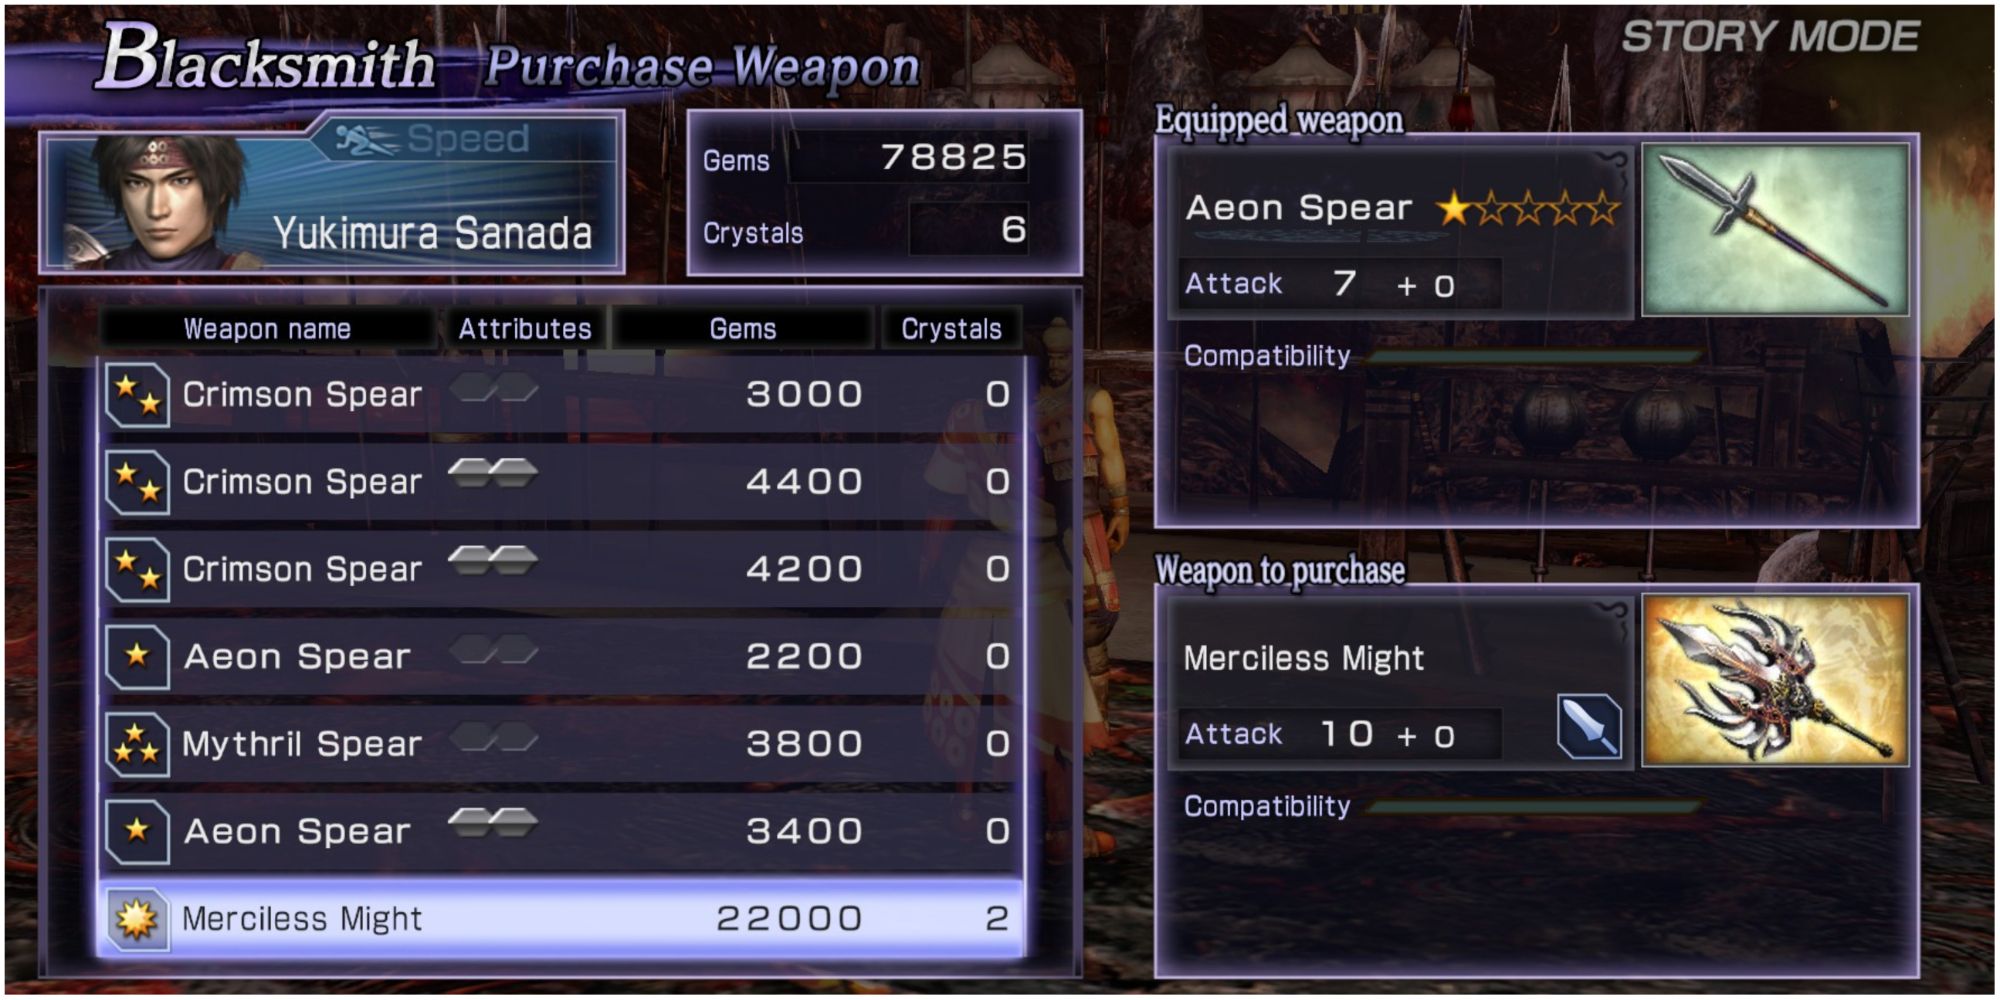 Warriors Orochi 3 Ultimate Big Star Weapon in the Blacksmith Shop